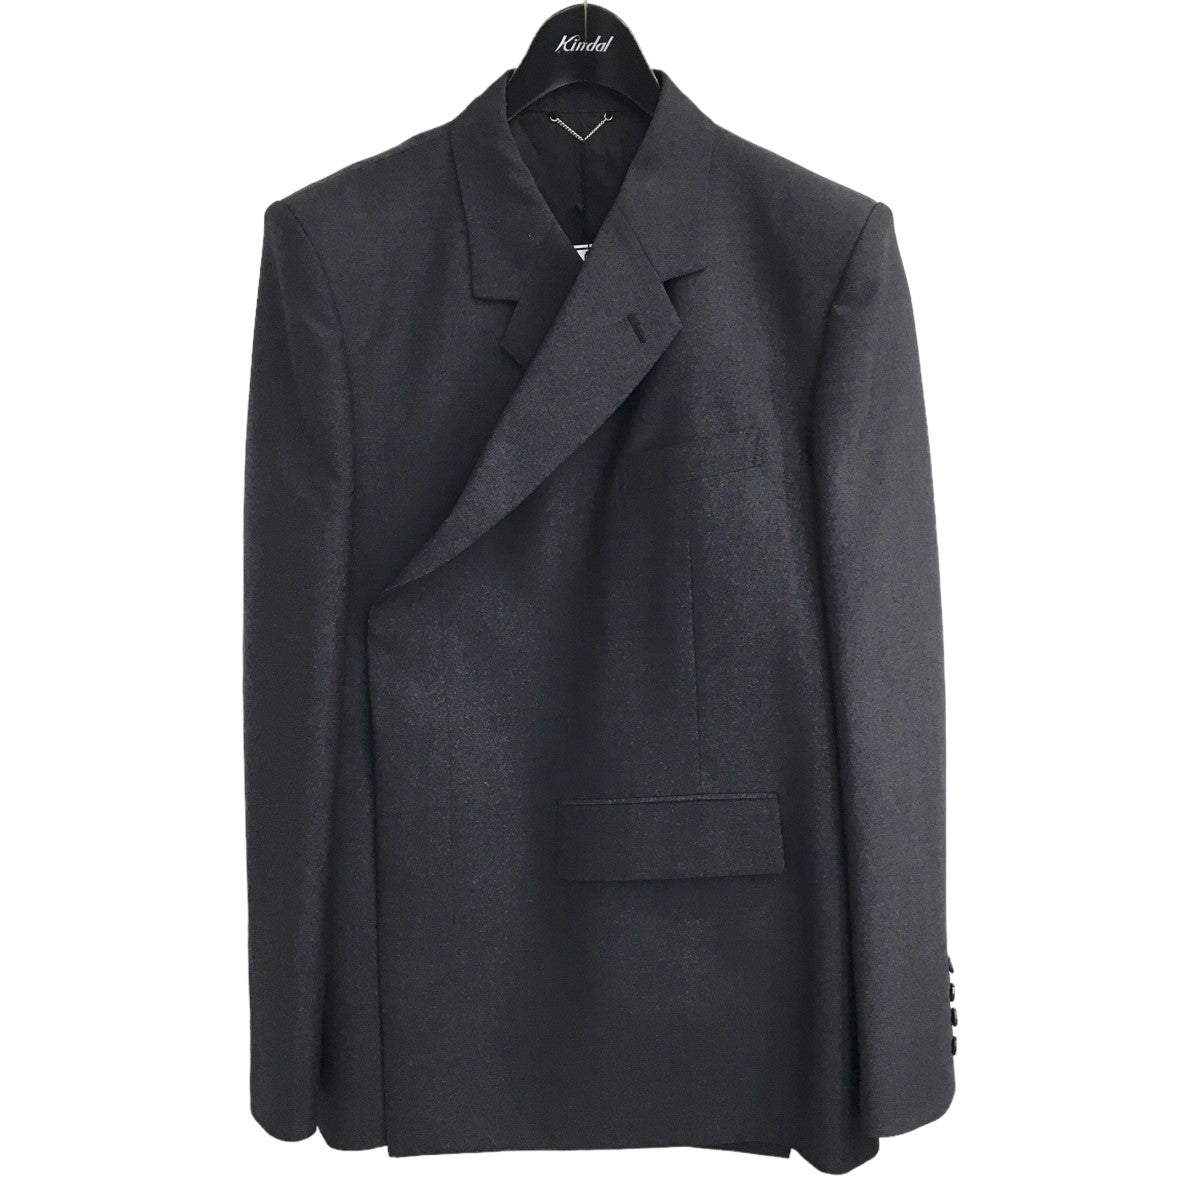 「MOHAIR WOOL FLY FLONT DOUBLEBREASTED JACKET」ジャケット